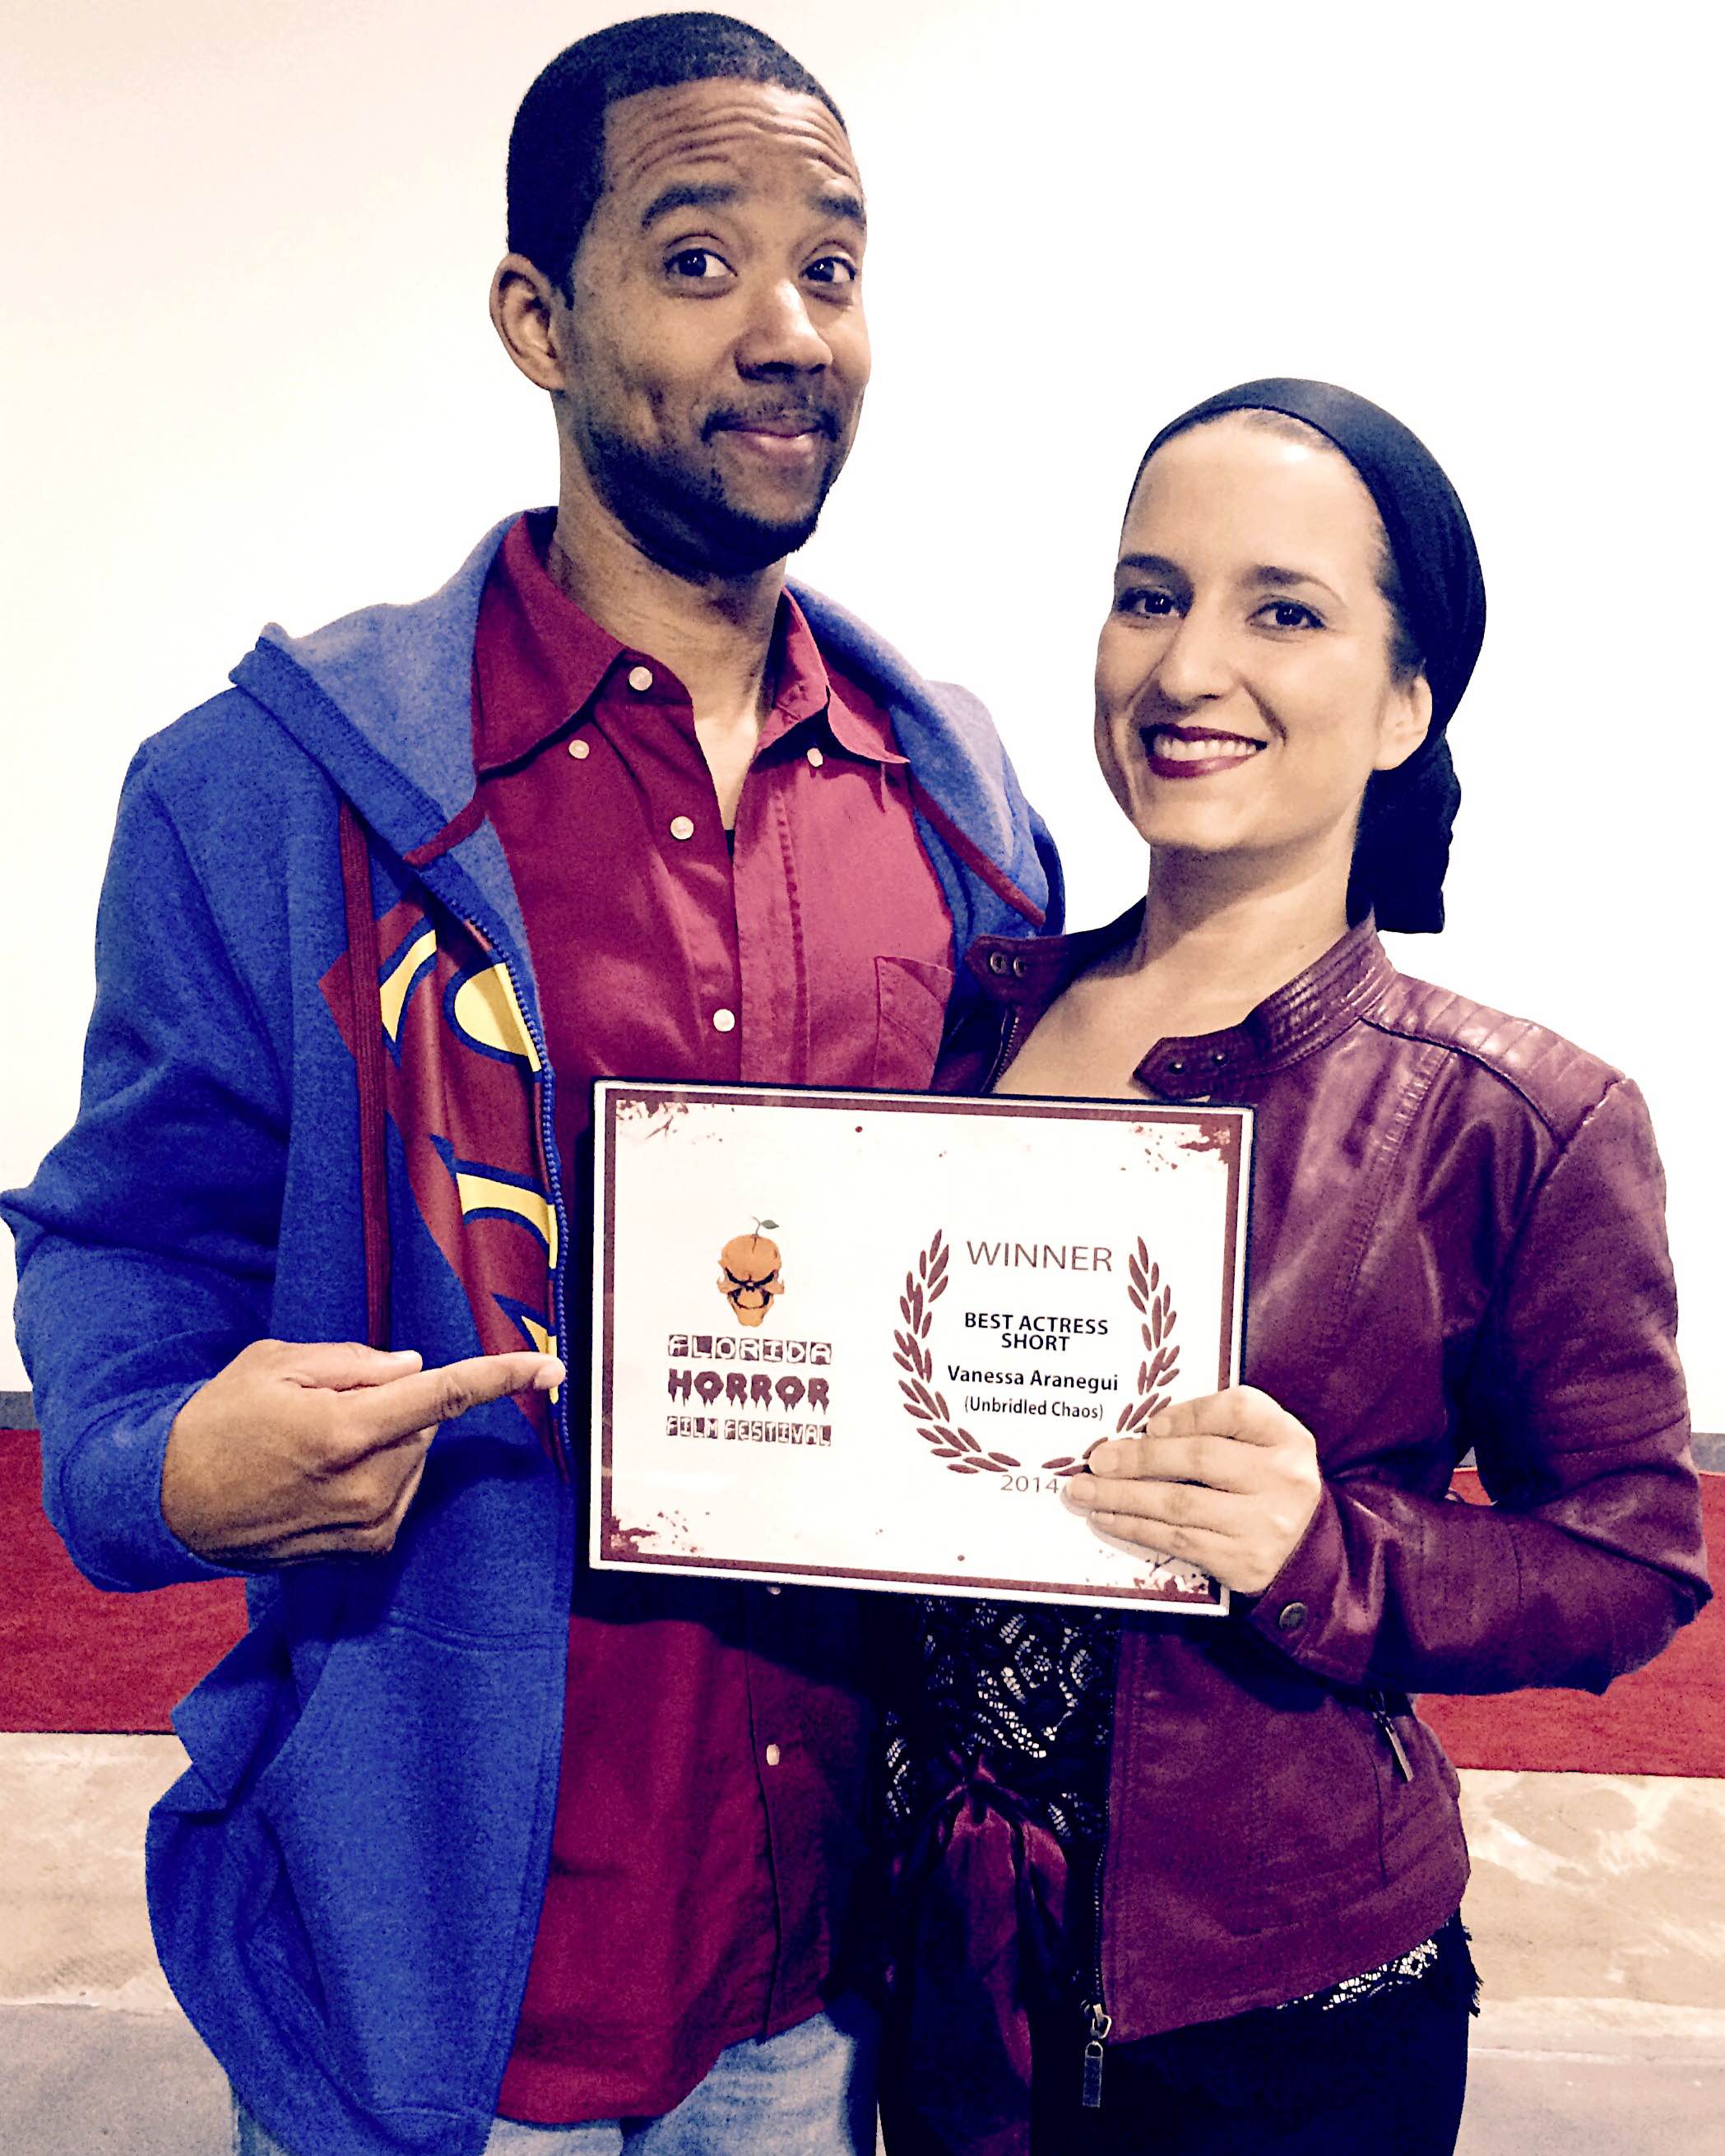 Vanessa with Unbridled Chaos Director Chris Greene accepting her award for Best Actress.